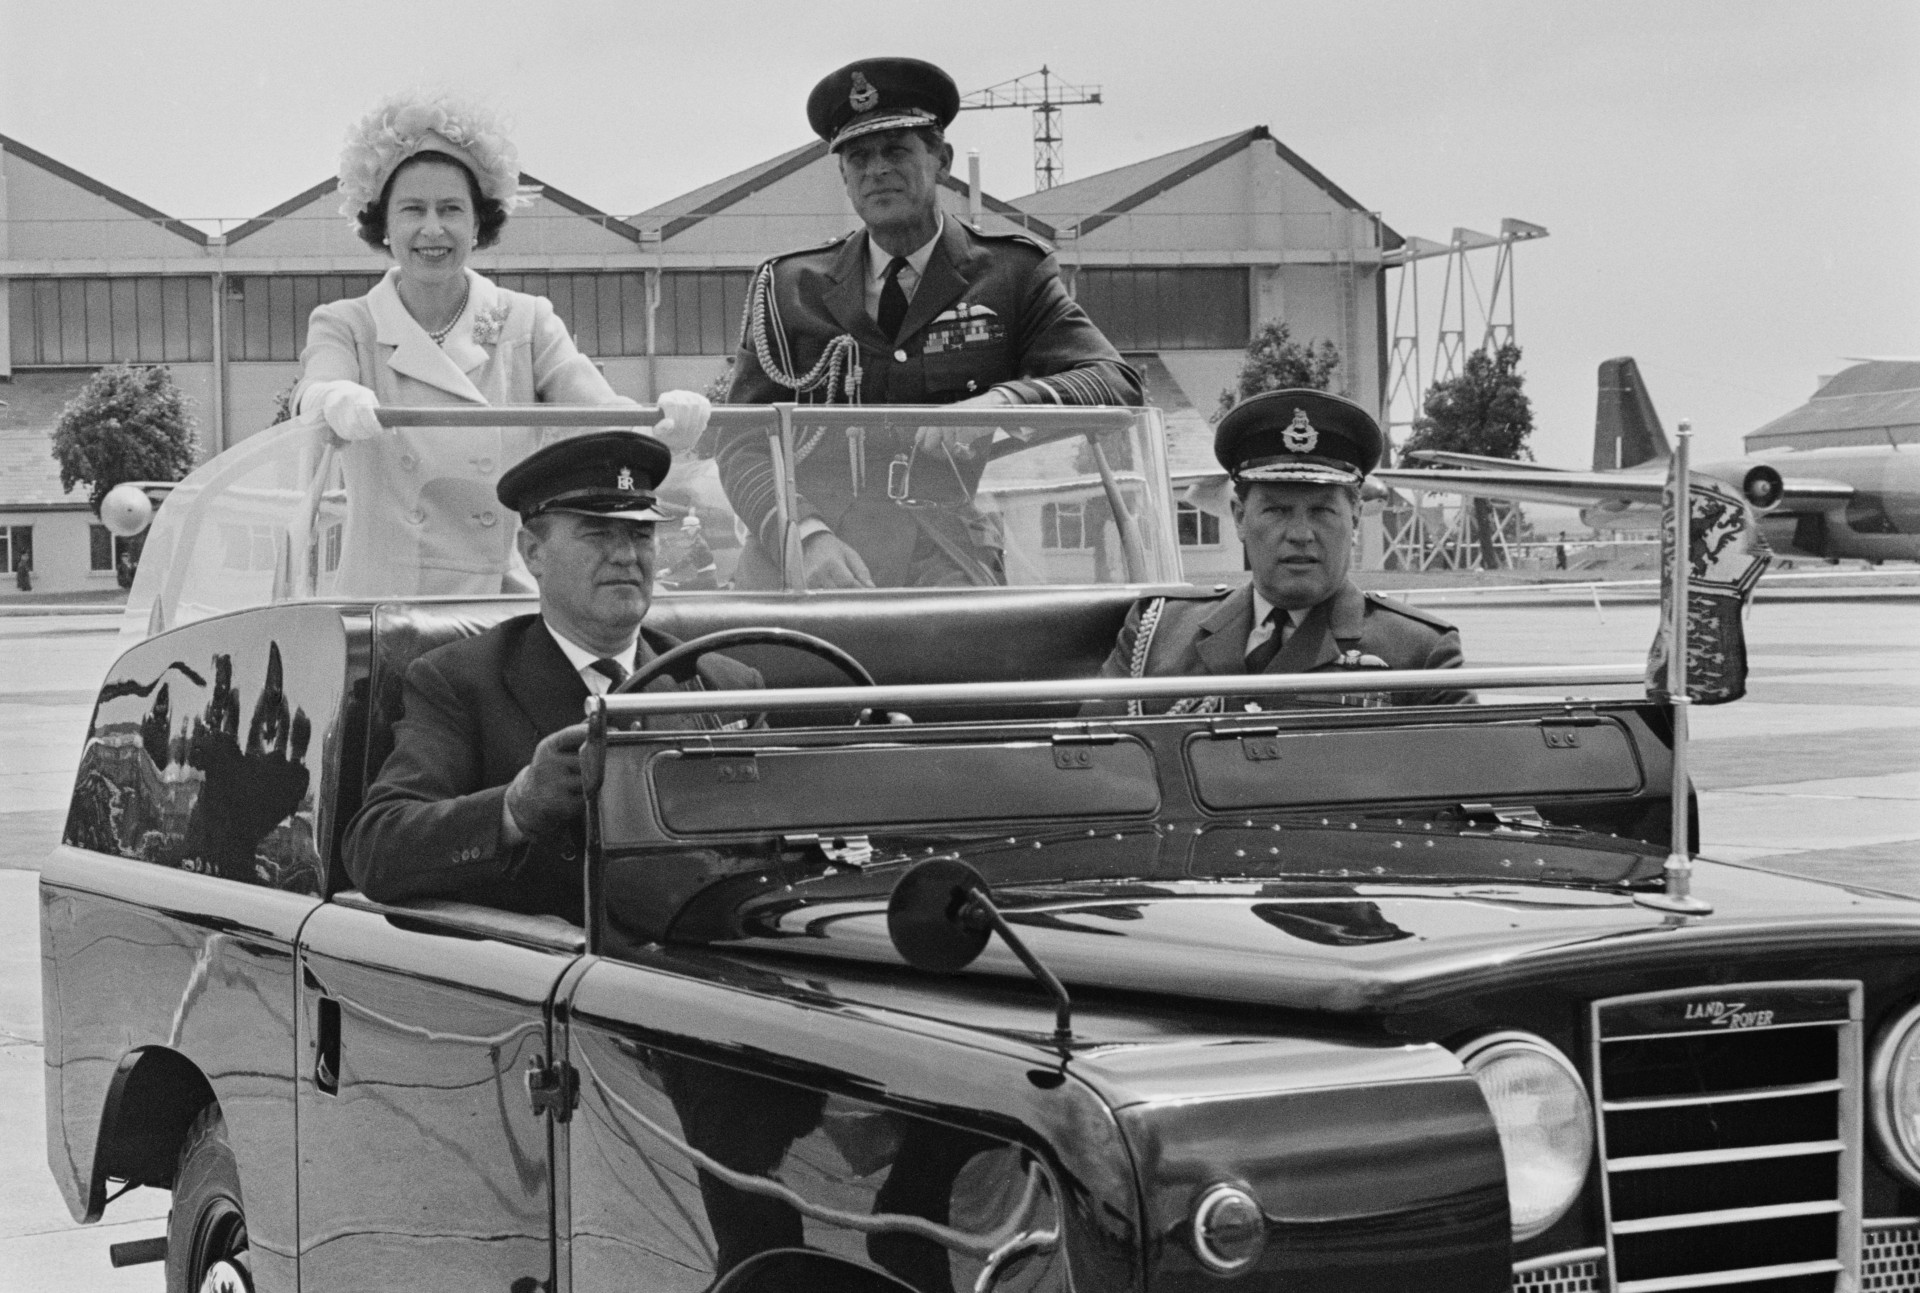 Queen Elizabeth II and Prince Philip arrive at Abingdon to celebrate 50 years of the Royal Air Force.<p><a href="https://www.msn.com/en-nz/community/channel/vid-7xx8mnucu55yw63we9va2gwr7uihbxwc68fxqp25x6tg4ftibpra?cvid=94631541bc0f4f89bfd59158d696ad7e">Follow us and access great exclusive content every day</a></p>